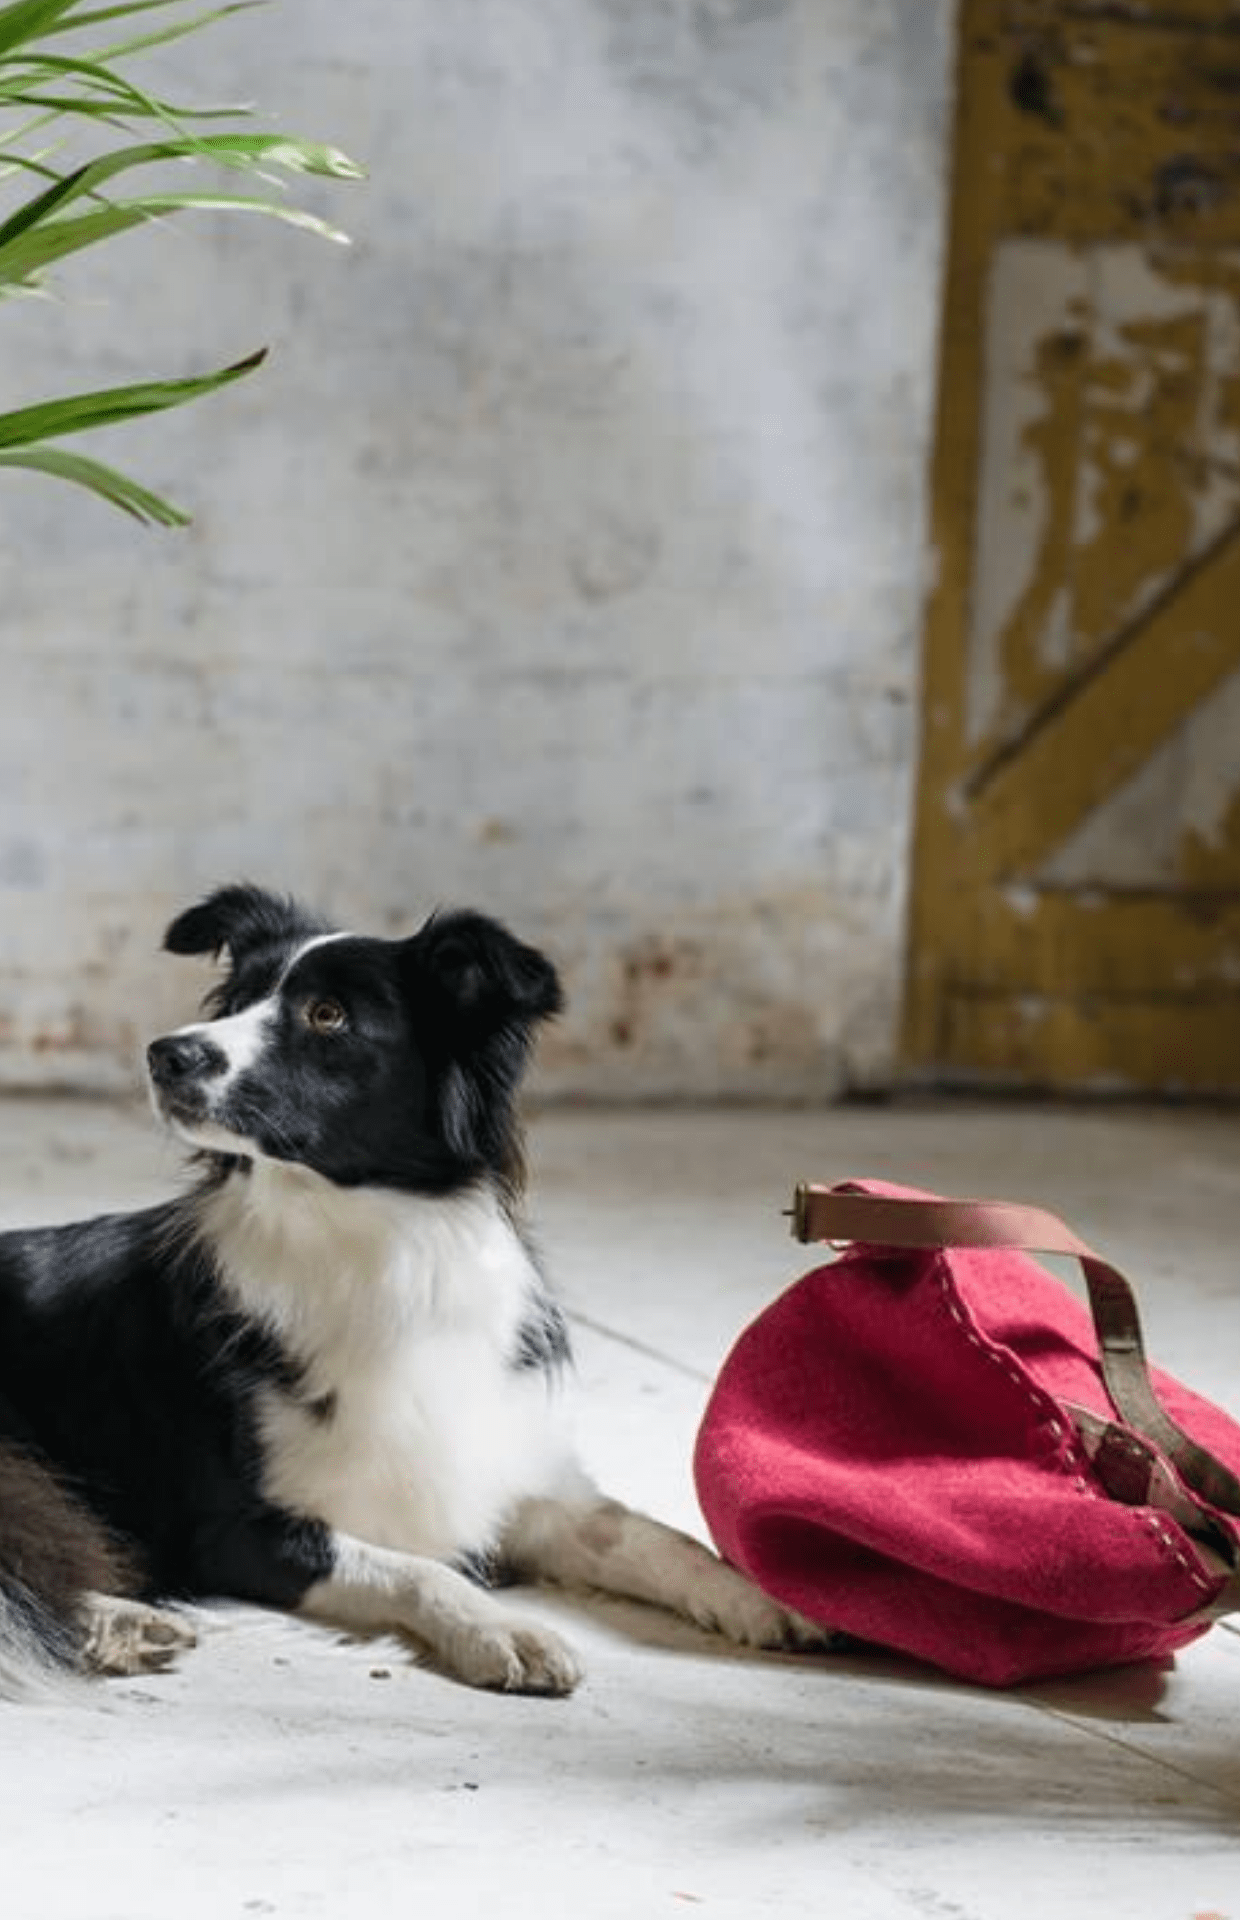 A border collie laying down next to the egyptian red jute bag, with matching colours as the black and white stitching on the bag.